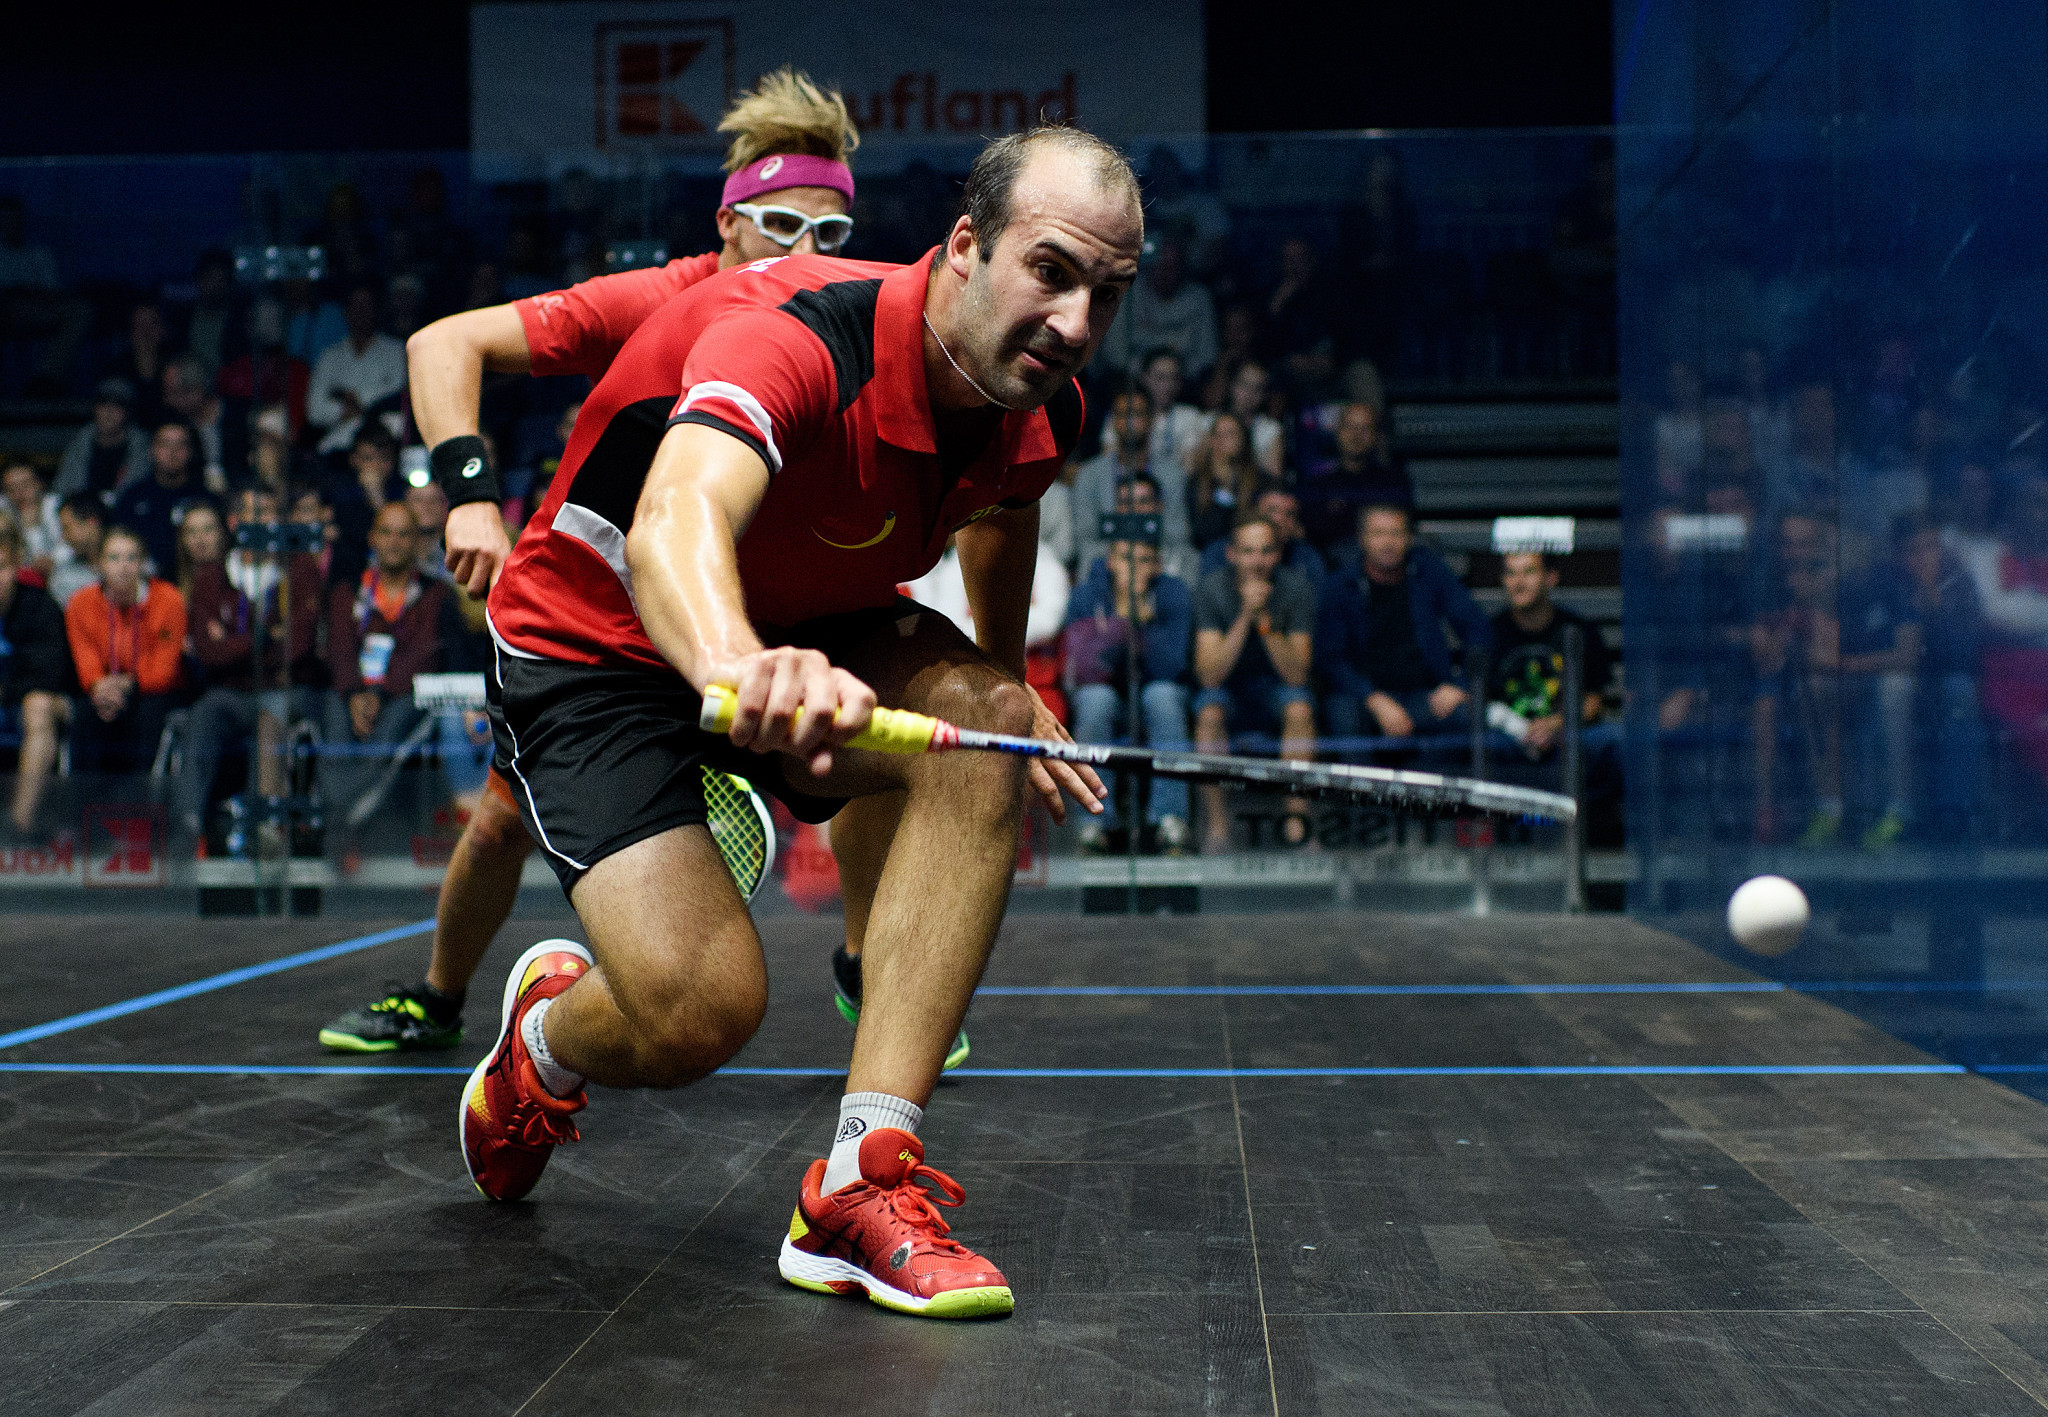 Germany's Simon Rösner will be challenging the top seeds and home favourites at the Black Ball Squash Open in Cairo ©Getty Images